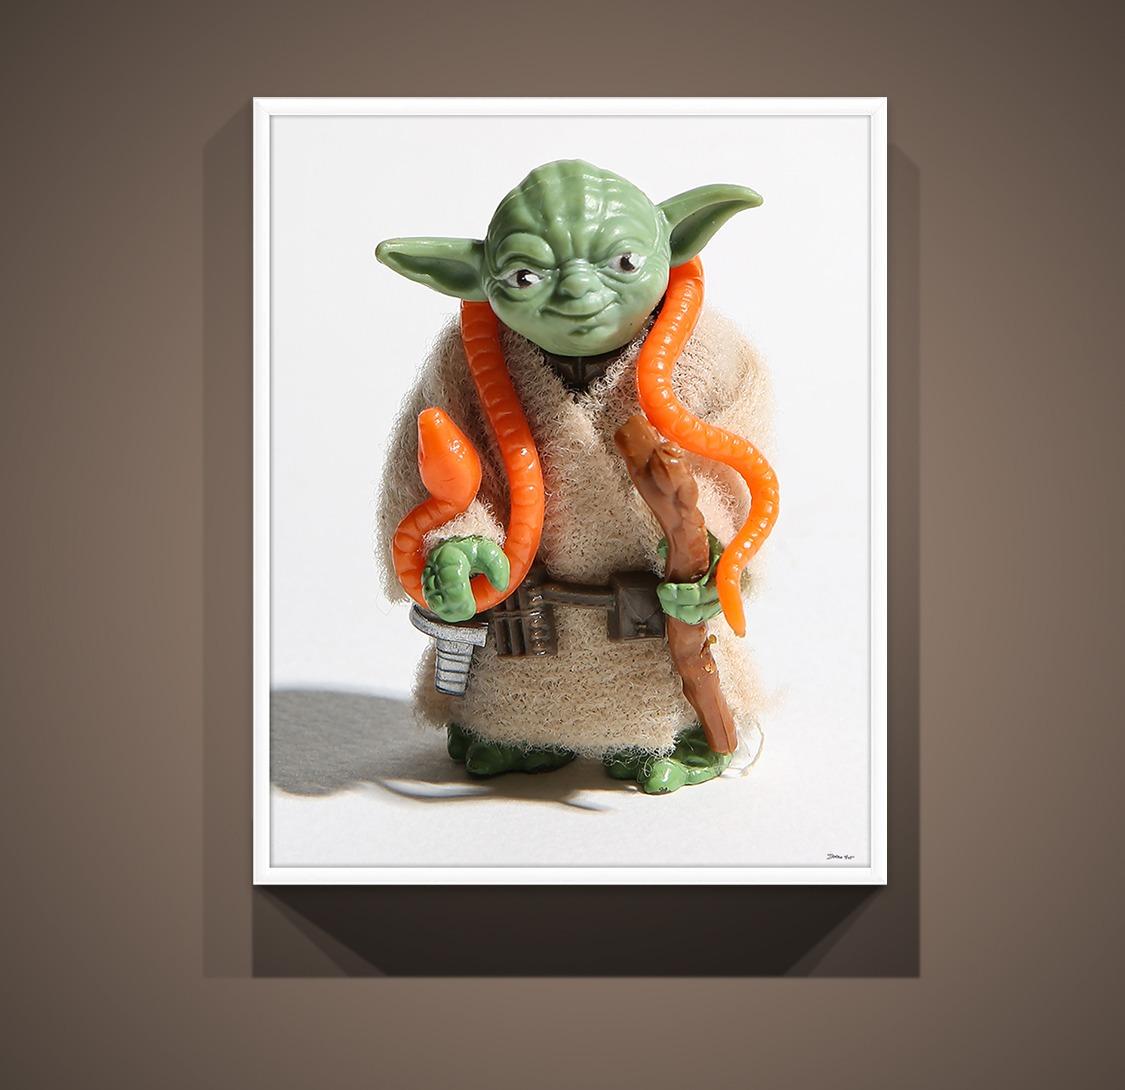 how old was yoda